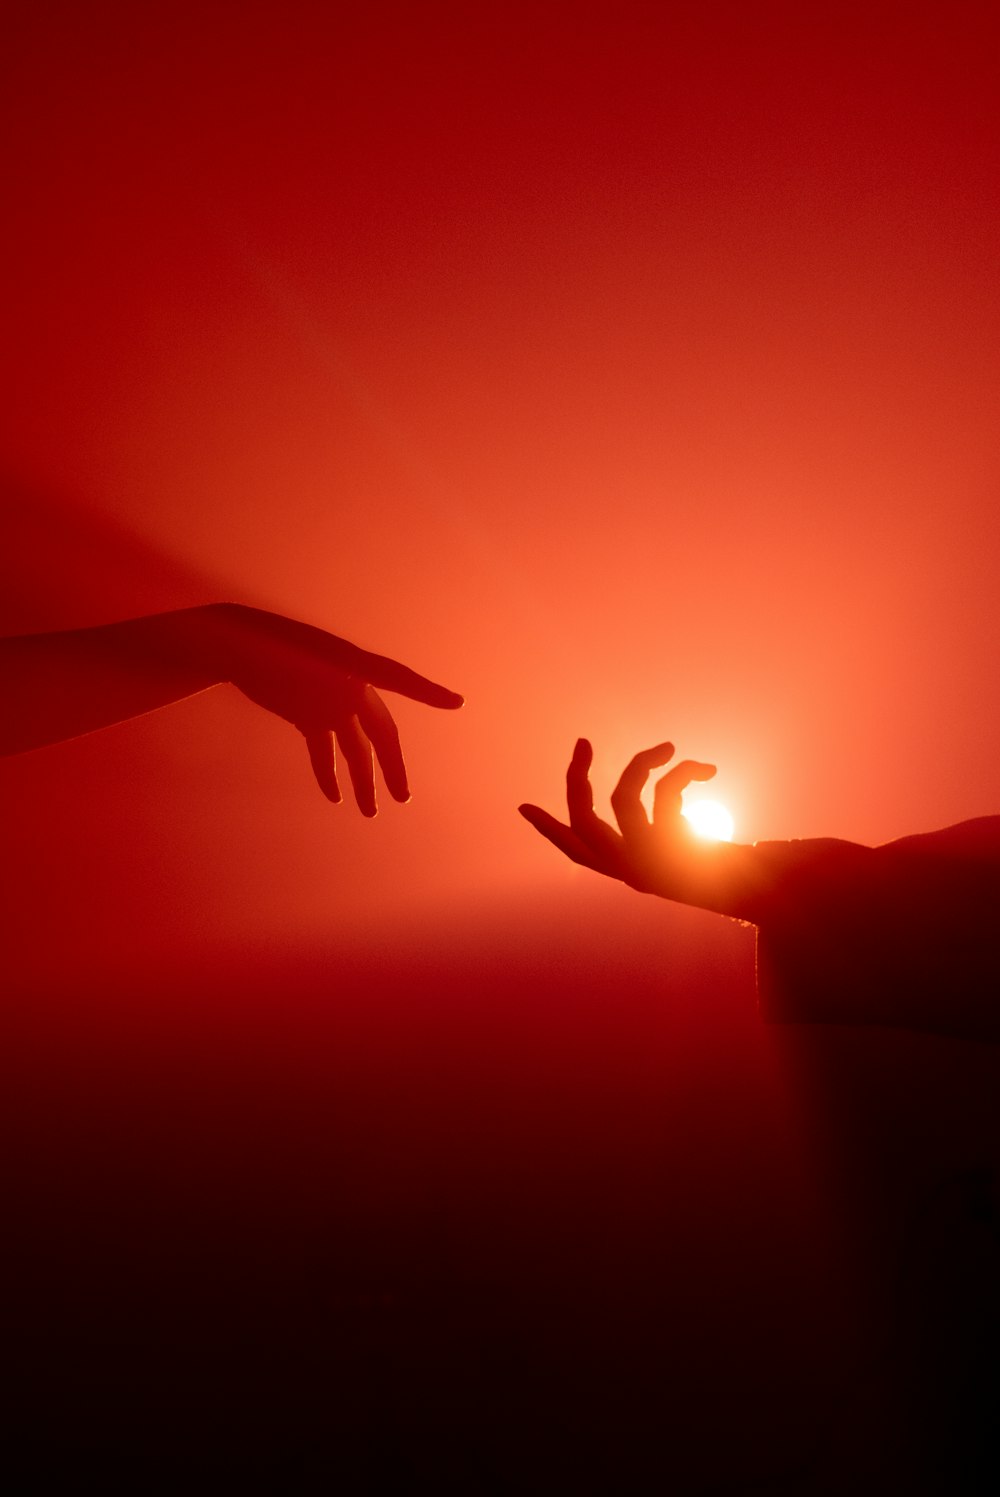 two hands reaching towards each other with the sun in the background